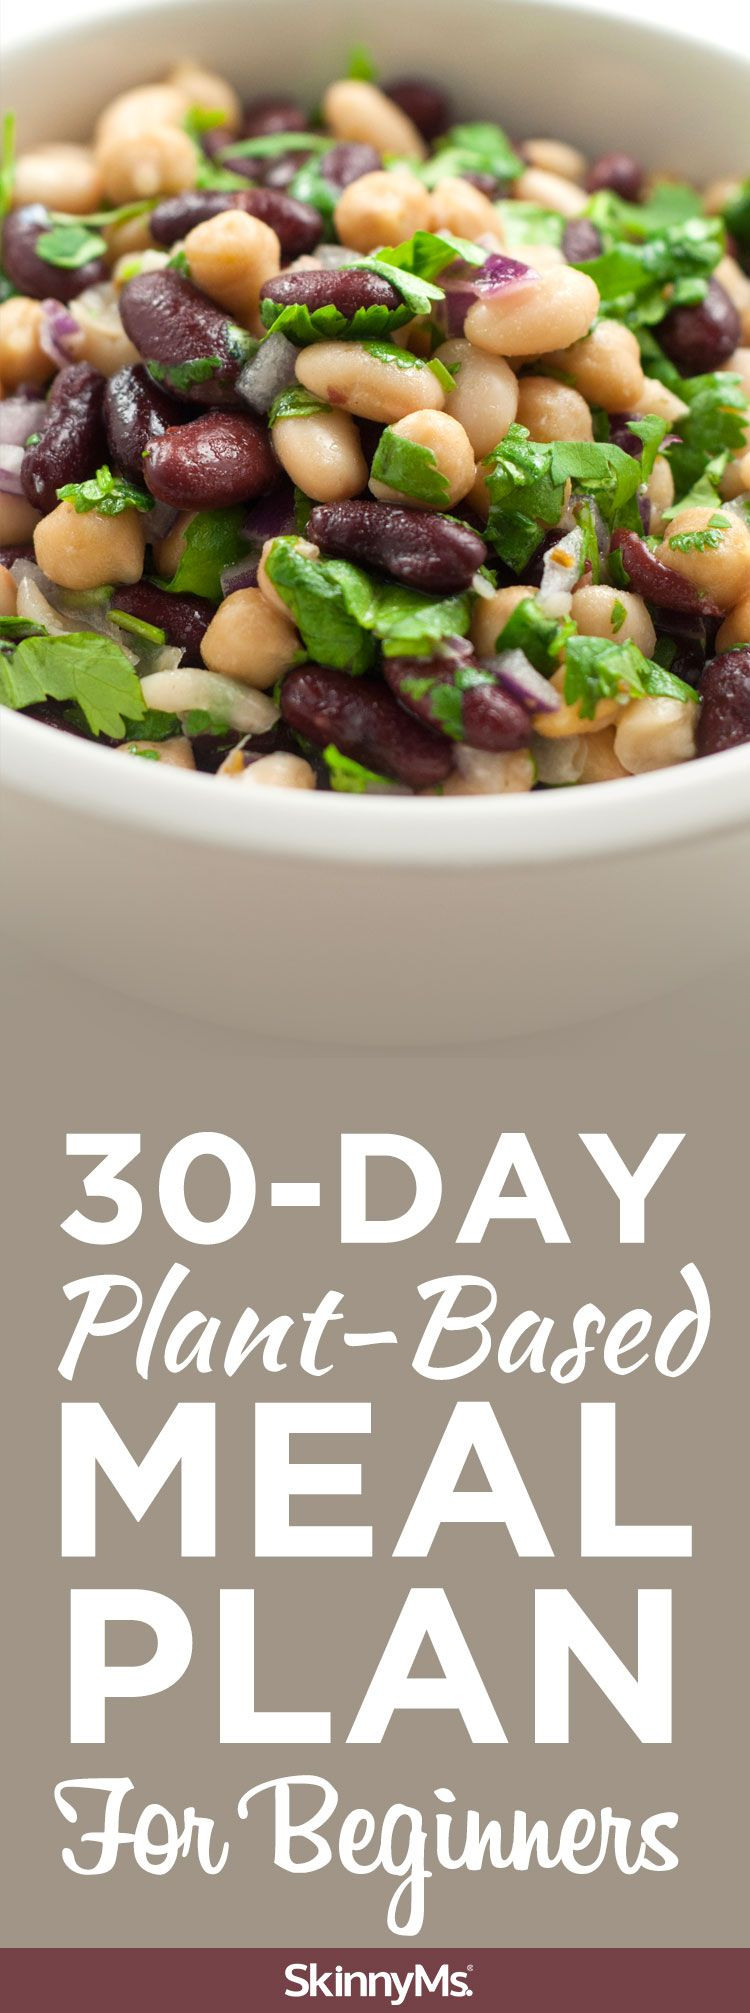 Plant Based Diet For Beginners Meals
 30 Day Plant Based Meal Plan For Beginners